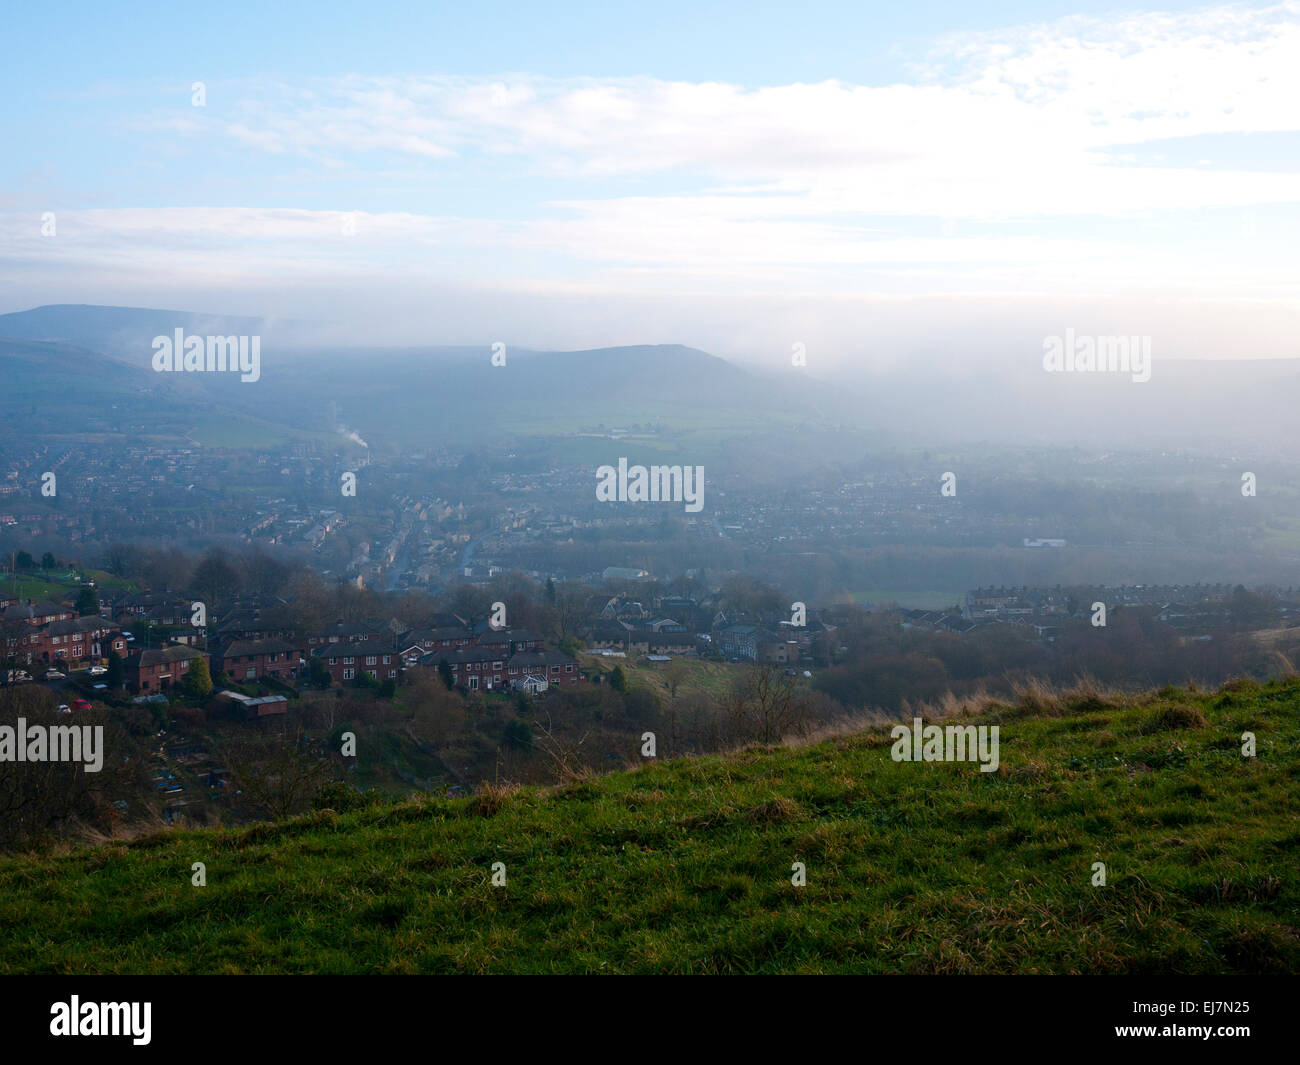 Misty day over Mossley with the pennine hills in the background, Mossley, Greater Manchester, UK. Stock Photo